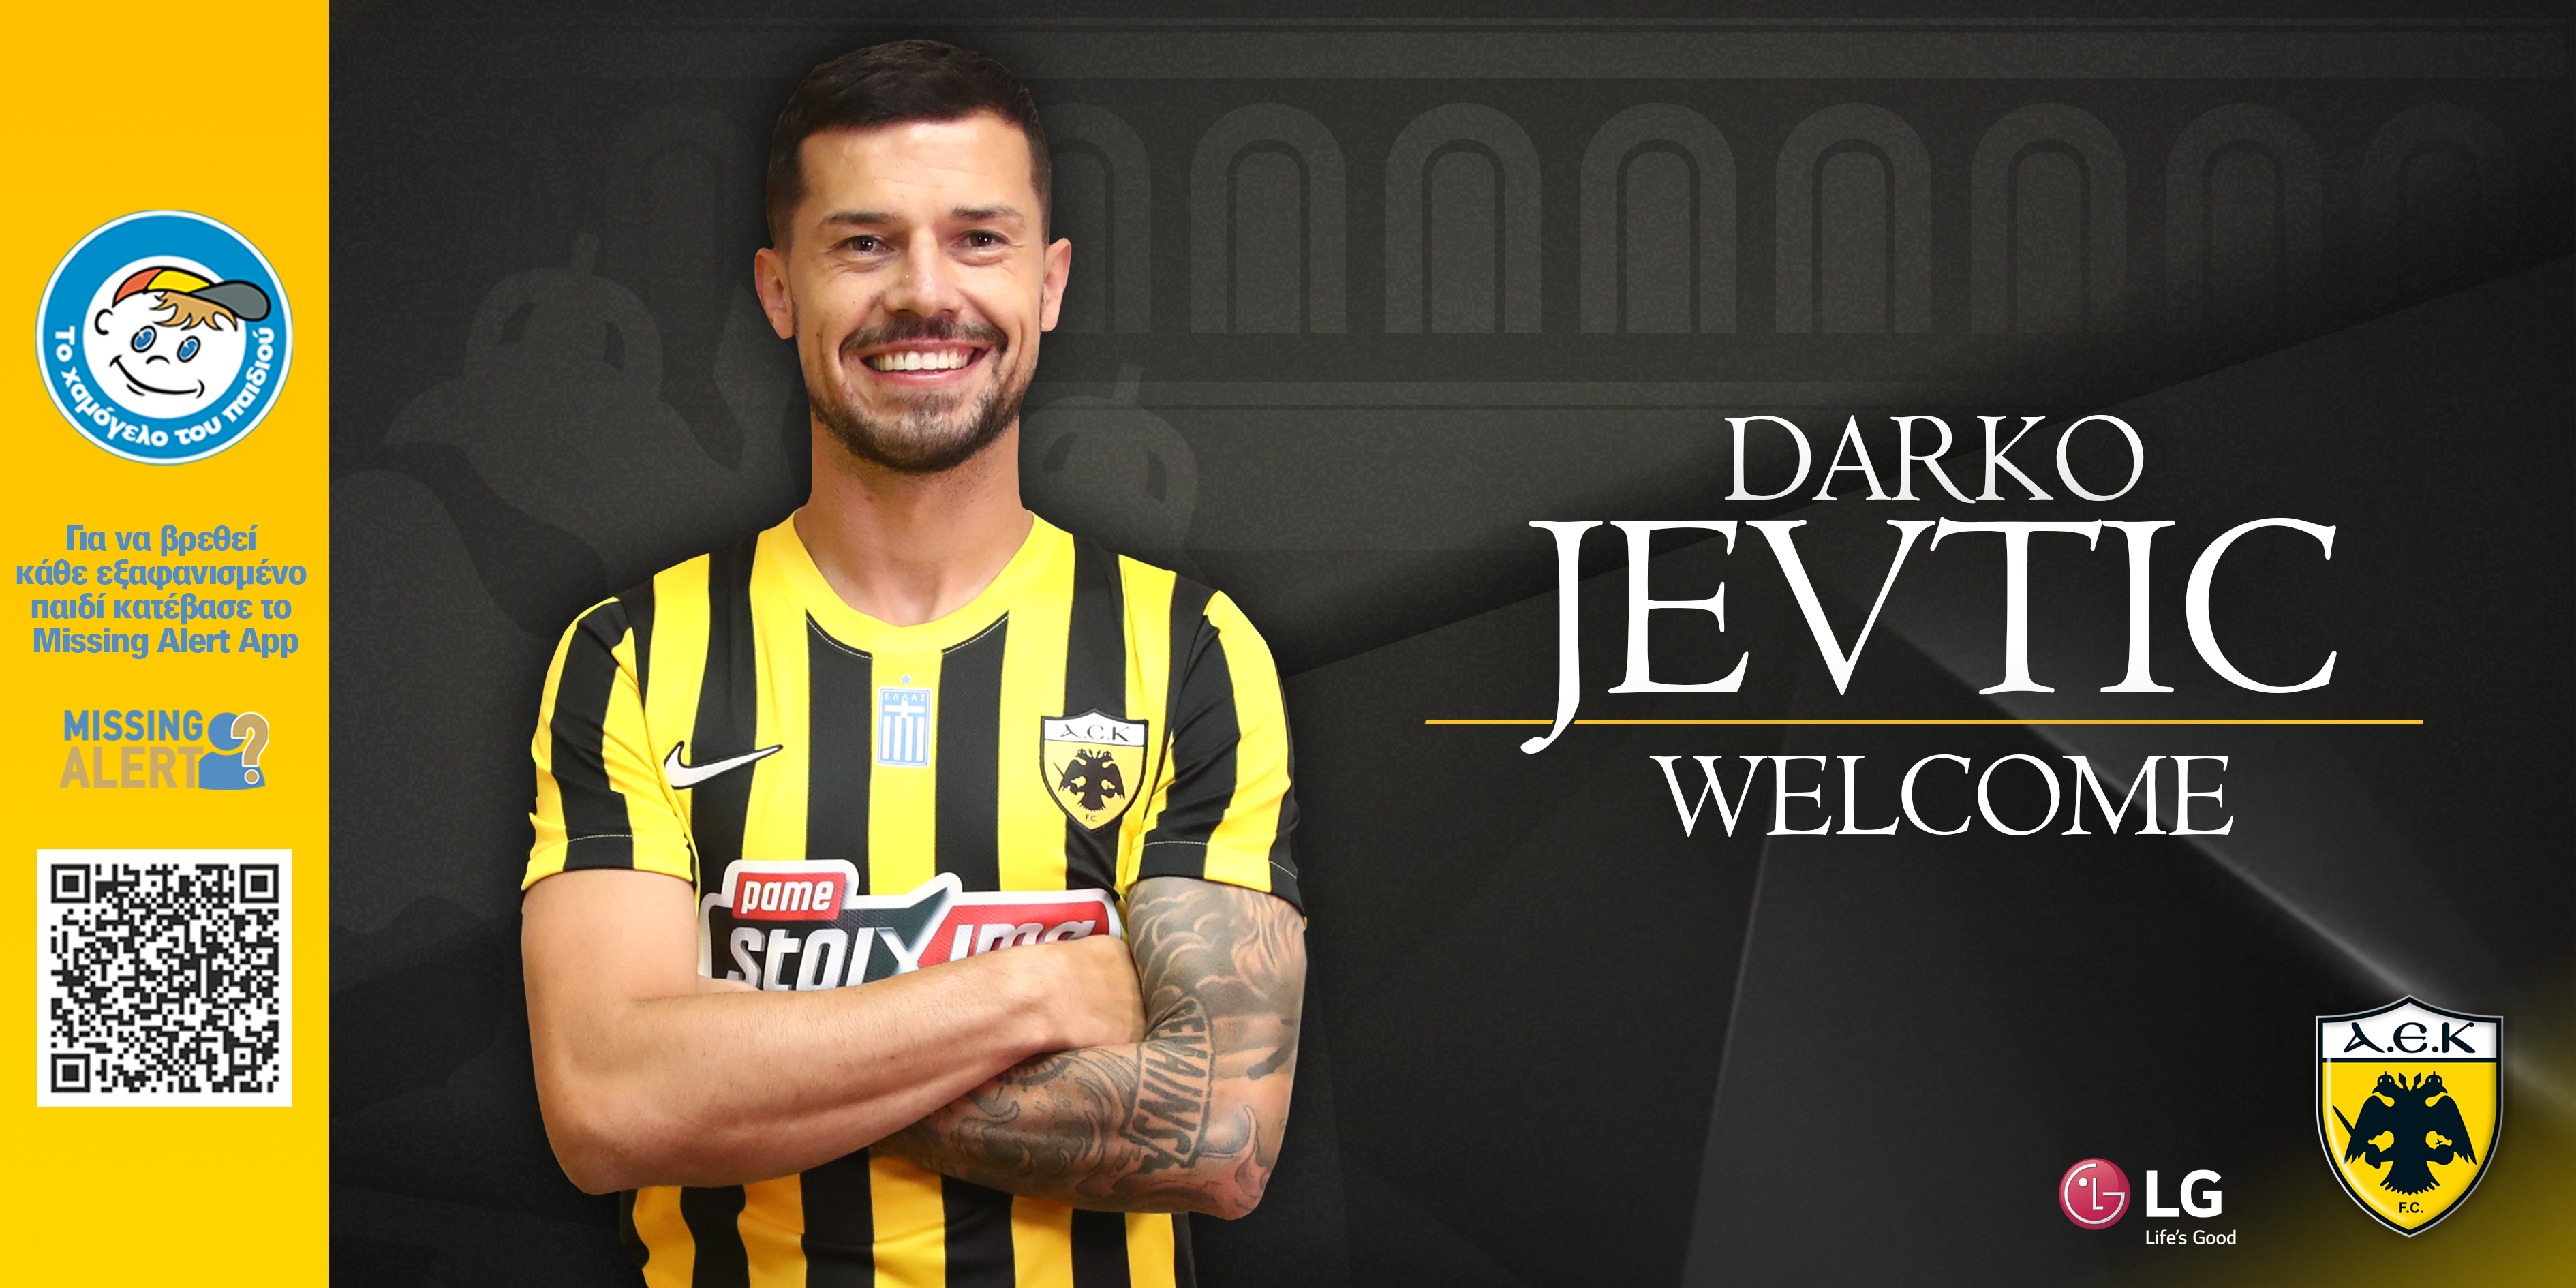 AEK F.C. on Twitter: "👉 Στην ΑΕΚ ο Ντάρκο Γέβτιτς! 👉 Darko Jevtic in  Yellow and Black! 👉ΑΕΚ FC reach loan agreement with @fcrk to sign Darko  Jevtic with option to buy #